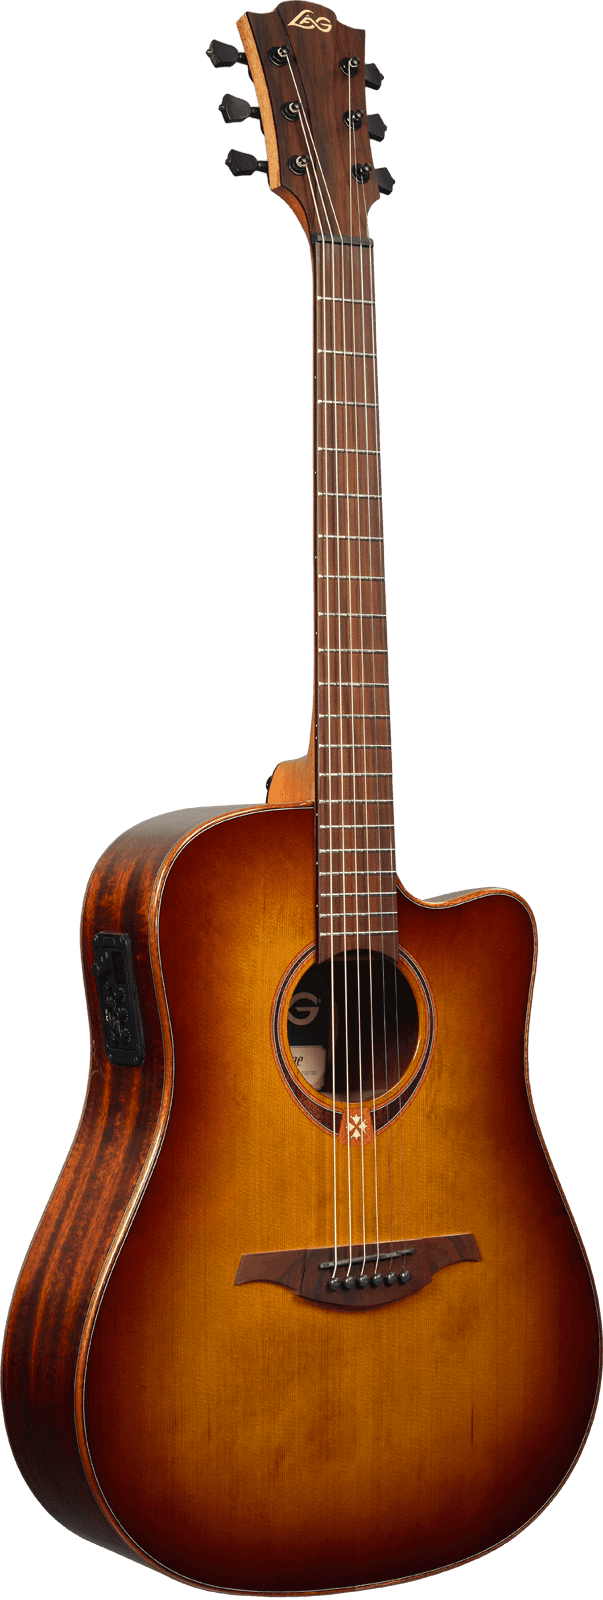 LAG TRAMONTANE 118 T118DCE-BRS DREADNOUGHT CUTAWAY ELECTRO BROWN SHADOW, Electro Acoustic Guitar for sale at Richards Guitars.